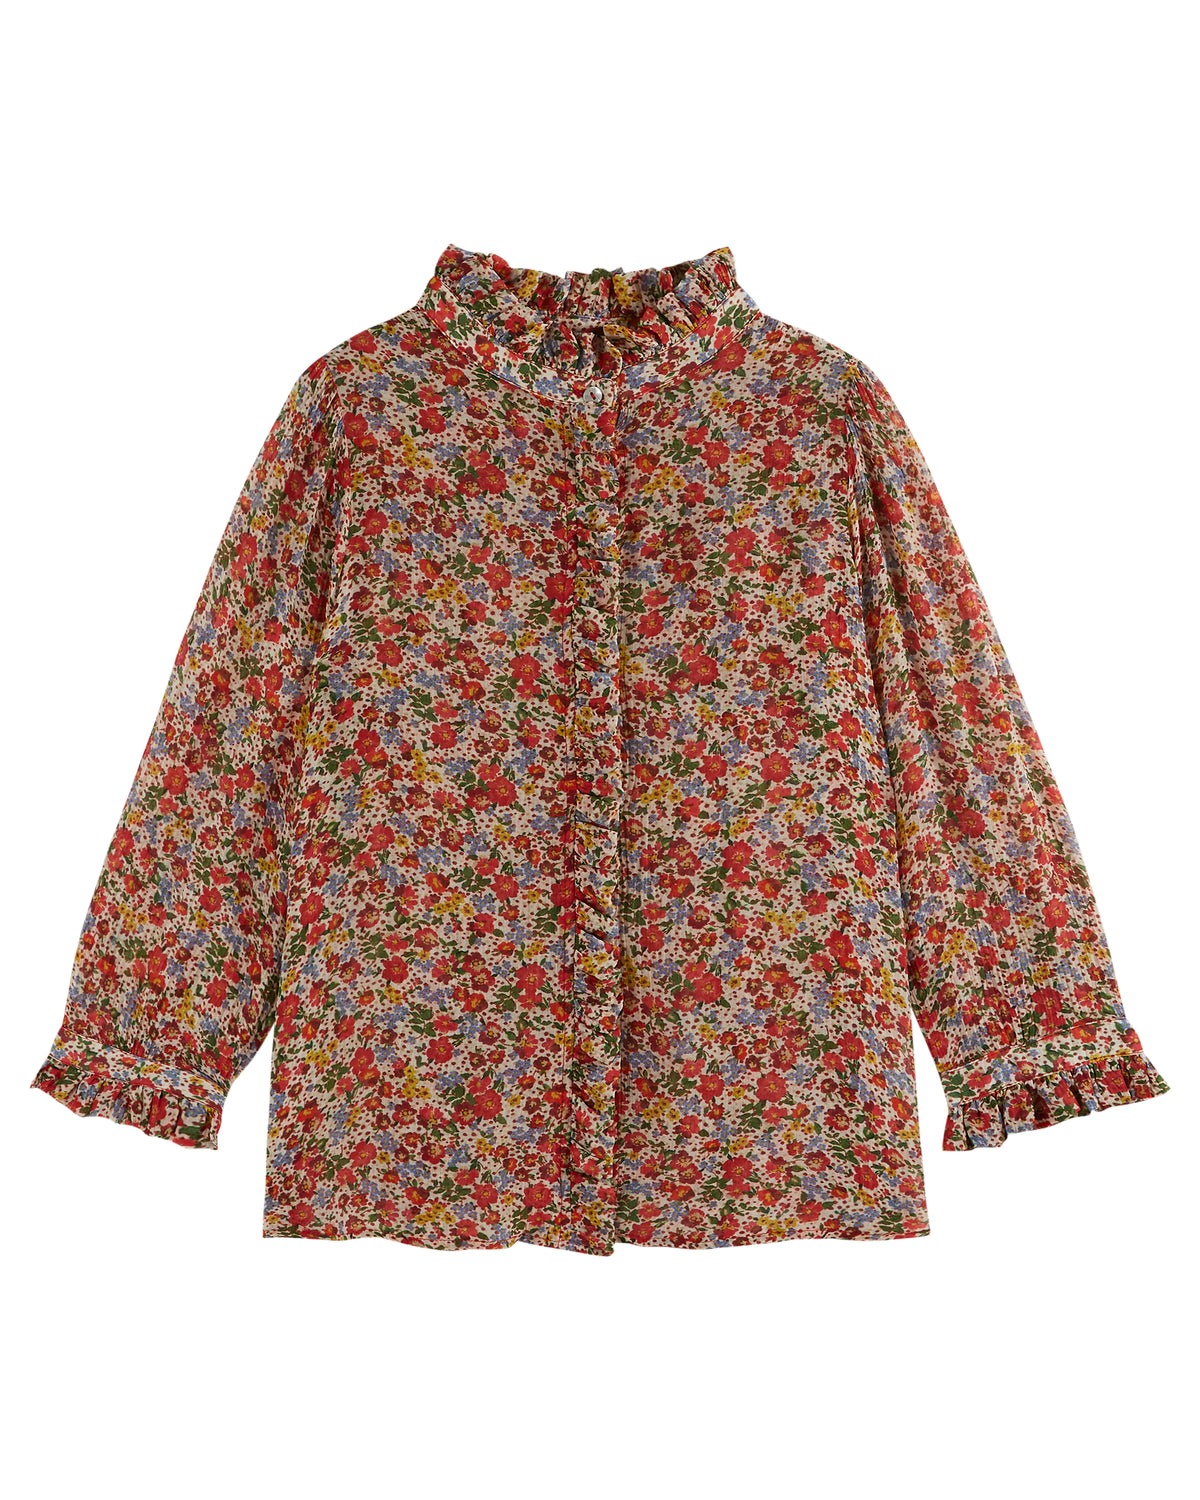 Ditsy floral blouse with ruffle details and three quarter length sleeves